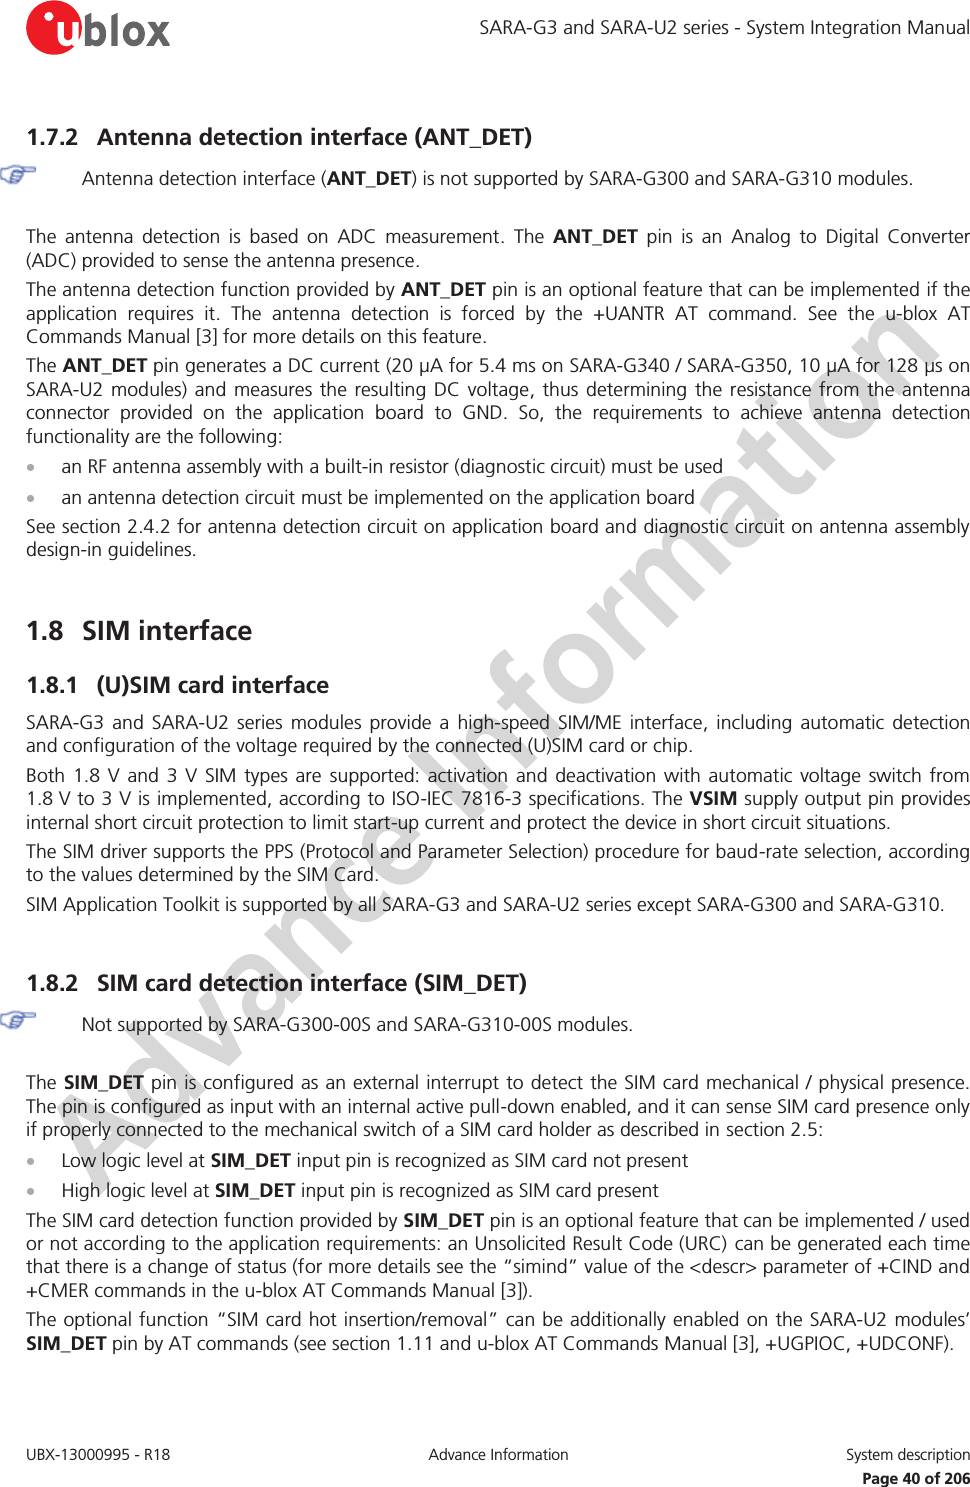 SARA-G3 and SARA-U2 series - System Integration Manual UBX-13000995 - R18  Advance Information  System description   Page 40 of 206 1.7.2 Antenna detection interface (ANT_DET)  Antenna detection interface (ANT_DET) is not supported by SARA-G300 and SARA-G310 modules.  The antenna detection is based on ADC measurement. The ANT_DET pin is an Analog to Digital Converter (ADC) provided to sense the antenna presence. The antenna detection function provided by ANT_DET pin is an optional feature that can be implemented if the application requires it. The antenna detection is forced by the +UANTR AT command. See the u-blox AT Commands Manual [3] for more details on this feature. The ANT_DET pin generates a DC current (20 μA for 5.4 ms on SARA-G340 / SARA-G350, 10 μA for 128 μs on SARA-U2 modules) and measures the resulting DC voltage, thus determining the resistance from the antenna connector provided on the application board to GND. So, the requirements to achieve antenna detection functionality are the following: x an RF antenna assembly with a built-in resistor (diagnostic circuit) must be used x an antenna detection circuit must be implemented on the application board See section 2.4.2 for antenna detection circuit on application board and diagnostic circuit on antenna assembly design-in guidelines.  1.8 SIM interface 1.8.1 (U)SIM card interface SARA-G3 and SARA-U2 series modules provide a high-speed SIM/ME interface, including automatic detection and configuration of the voltage required by the connected (U)SIM card or chip. Both 1.8 V and 3 V SIM types are supported: activation and deactivation with automatic voltage switch from 1.8 V to 3 V is implemented, according to ISO-IEC 7816-3 specifications. The VSIM supply output pin provides internal short circuit protection to limit start-up current and protect the device in short circuit situations. The SIM driver supports the PPS (Protocol and Parameter Selection) procedure for baud-rate selection, according to the values determined by the SIM Card. SIM Application Toolkit is supported by all SARA-G3 and SARA-U2 series except SARA-G300 and SARA-G310.  1.8.2 SIM card detection interface (SIM_DET)  Not supported by SARA-G300-00S and SARA-G310-00S modules.  The SIM_DET pin is configured as an external interrupt to detect the SIM card mechanical / physical presence. The pin is configured as input with an internal active pull-down enabled, and it can sense SIM card presence only if properly connected to the mechanical switch of a SIM card holder as described in section 2.5: x Low logic level at SIM_DET input pin is recognized as SIM card not present x High logic level at SIM_DET input pin is recognized as SIM card present The SIM card detection function provided by SIM_DET pin is an optional feature that can be implemented / used or not according to the application requirements: an Unsolicited Result Code (URC) can be generated each time that there is a change of status (for more details see the “simind” value of the &lt;descr&gt; parameter of +CIND and +CMER commands in the u-blox AT Commands Manual [3]). The optional function “SIM card hot insertion/removal” can be additionally enabled on the SARA-U2 modules’ SIM_DET pin by AT commands (see section 1.11 and u-blox AT Commands Manual [3], +UGPIOC, +UDCONF).  